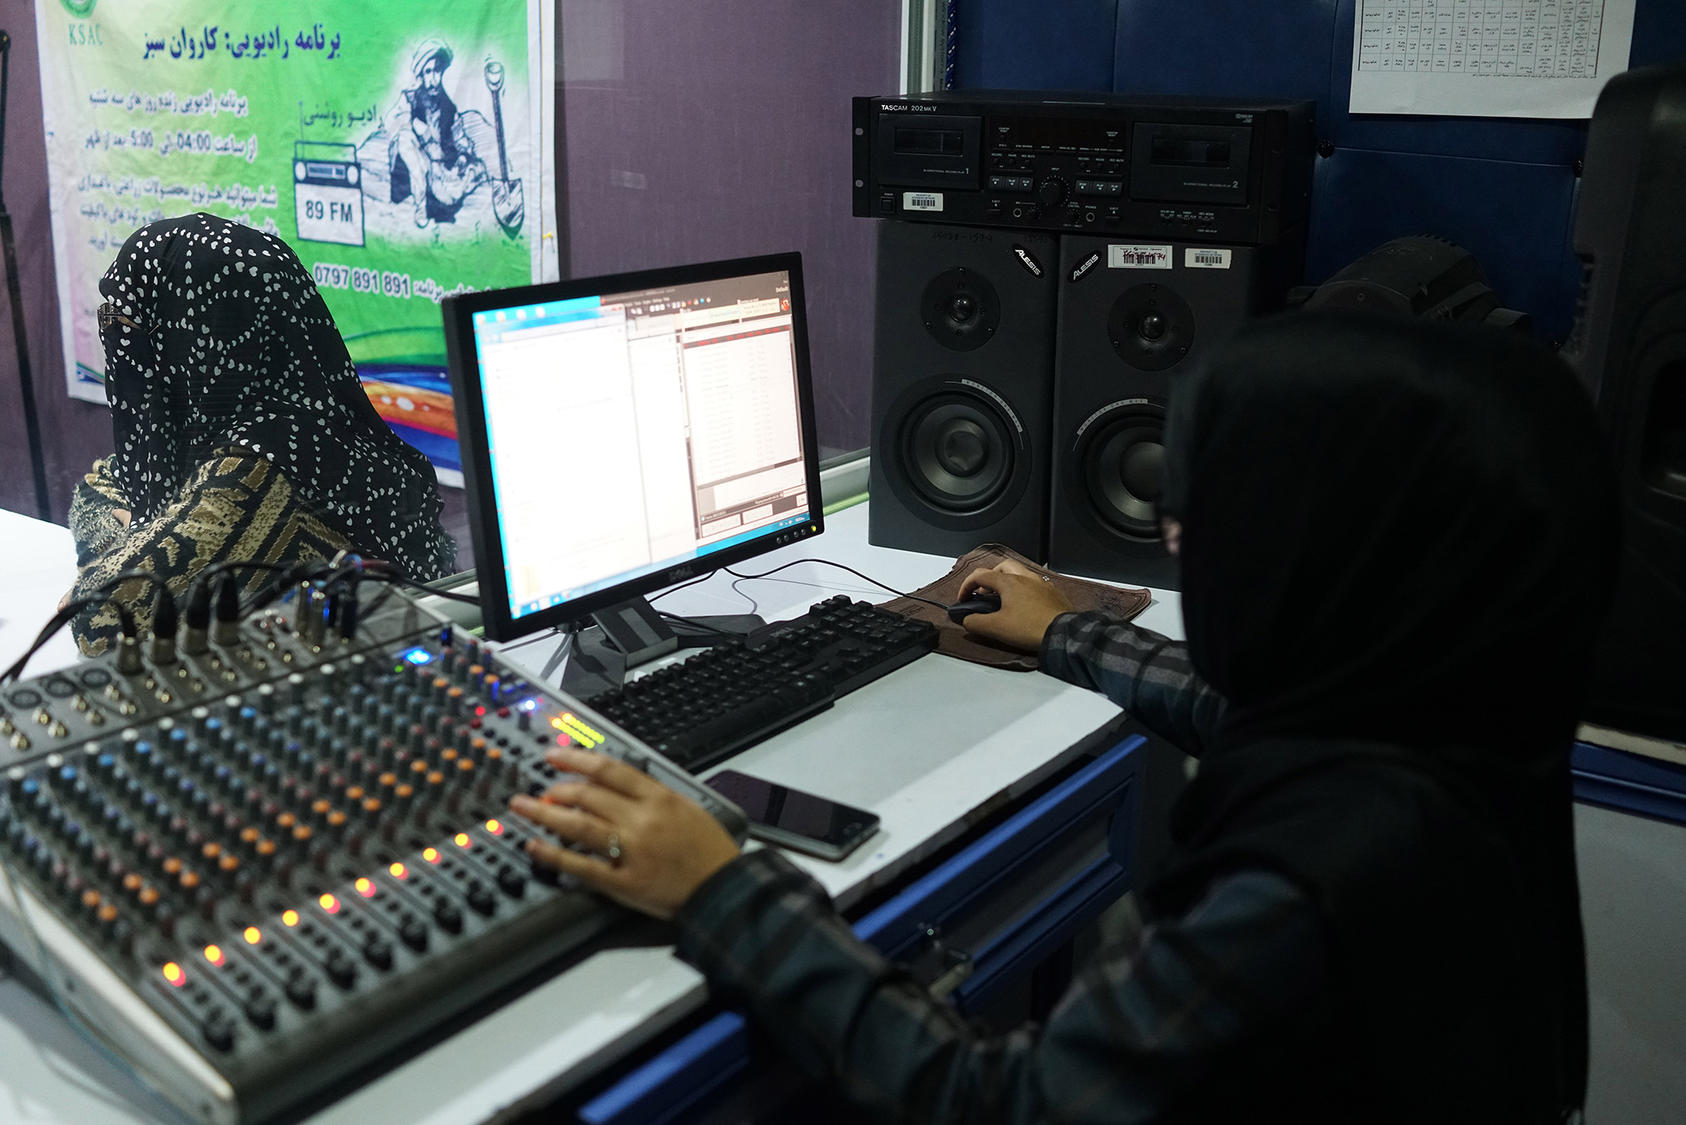 Radio Roshani, a shortwave station that educates women about their rights, which was briefly captured by the Taliban, who set fire to the studio in 2015, in Kunduz, Afghanistan, on March 2019. (Cora Engelbrecht/The New York Times)